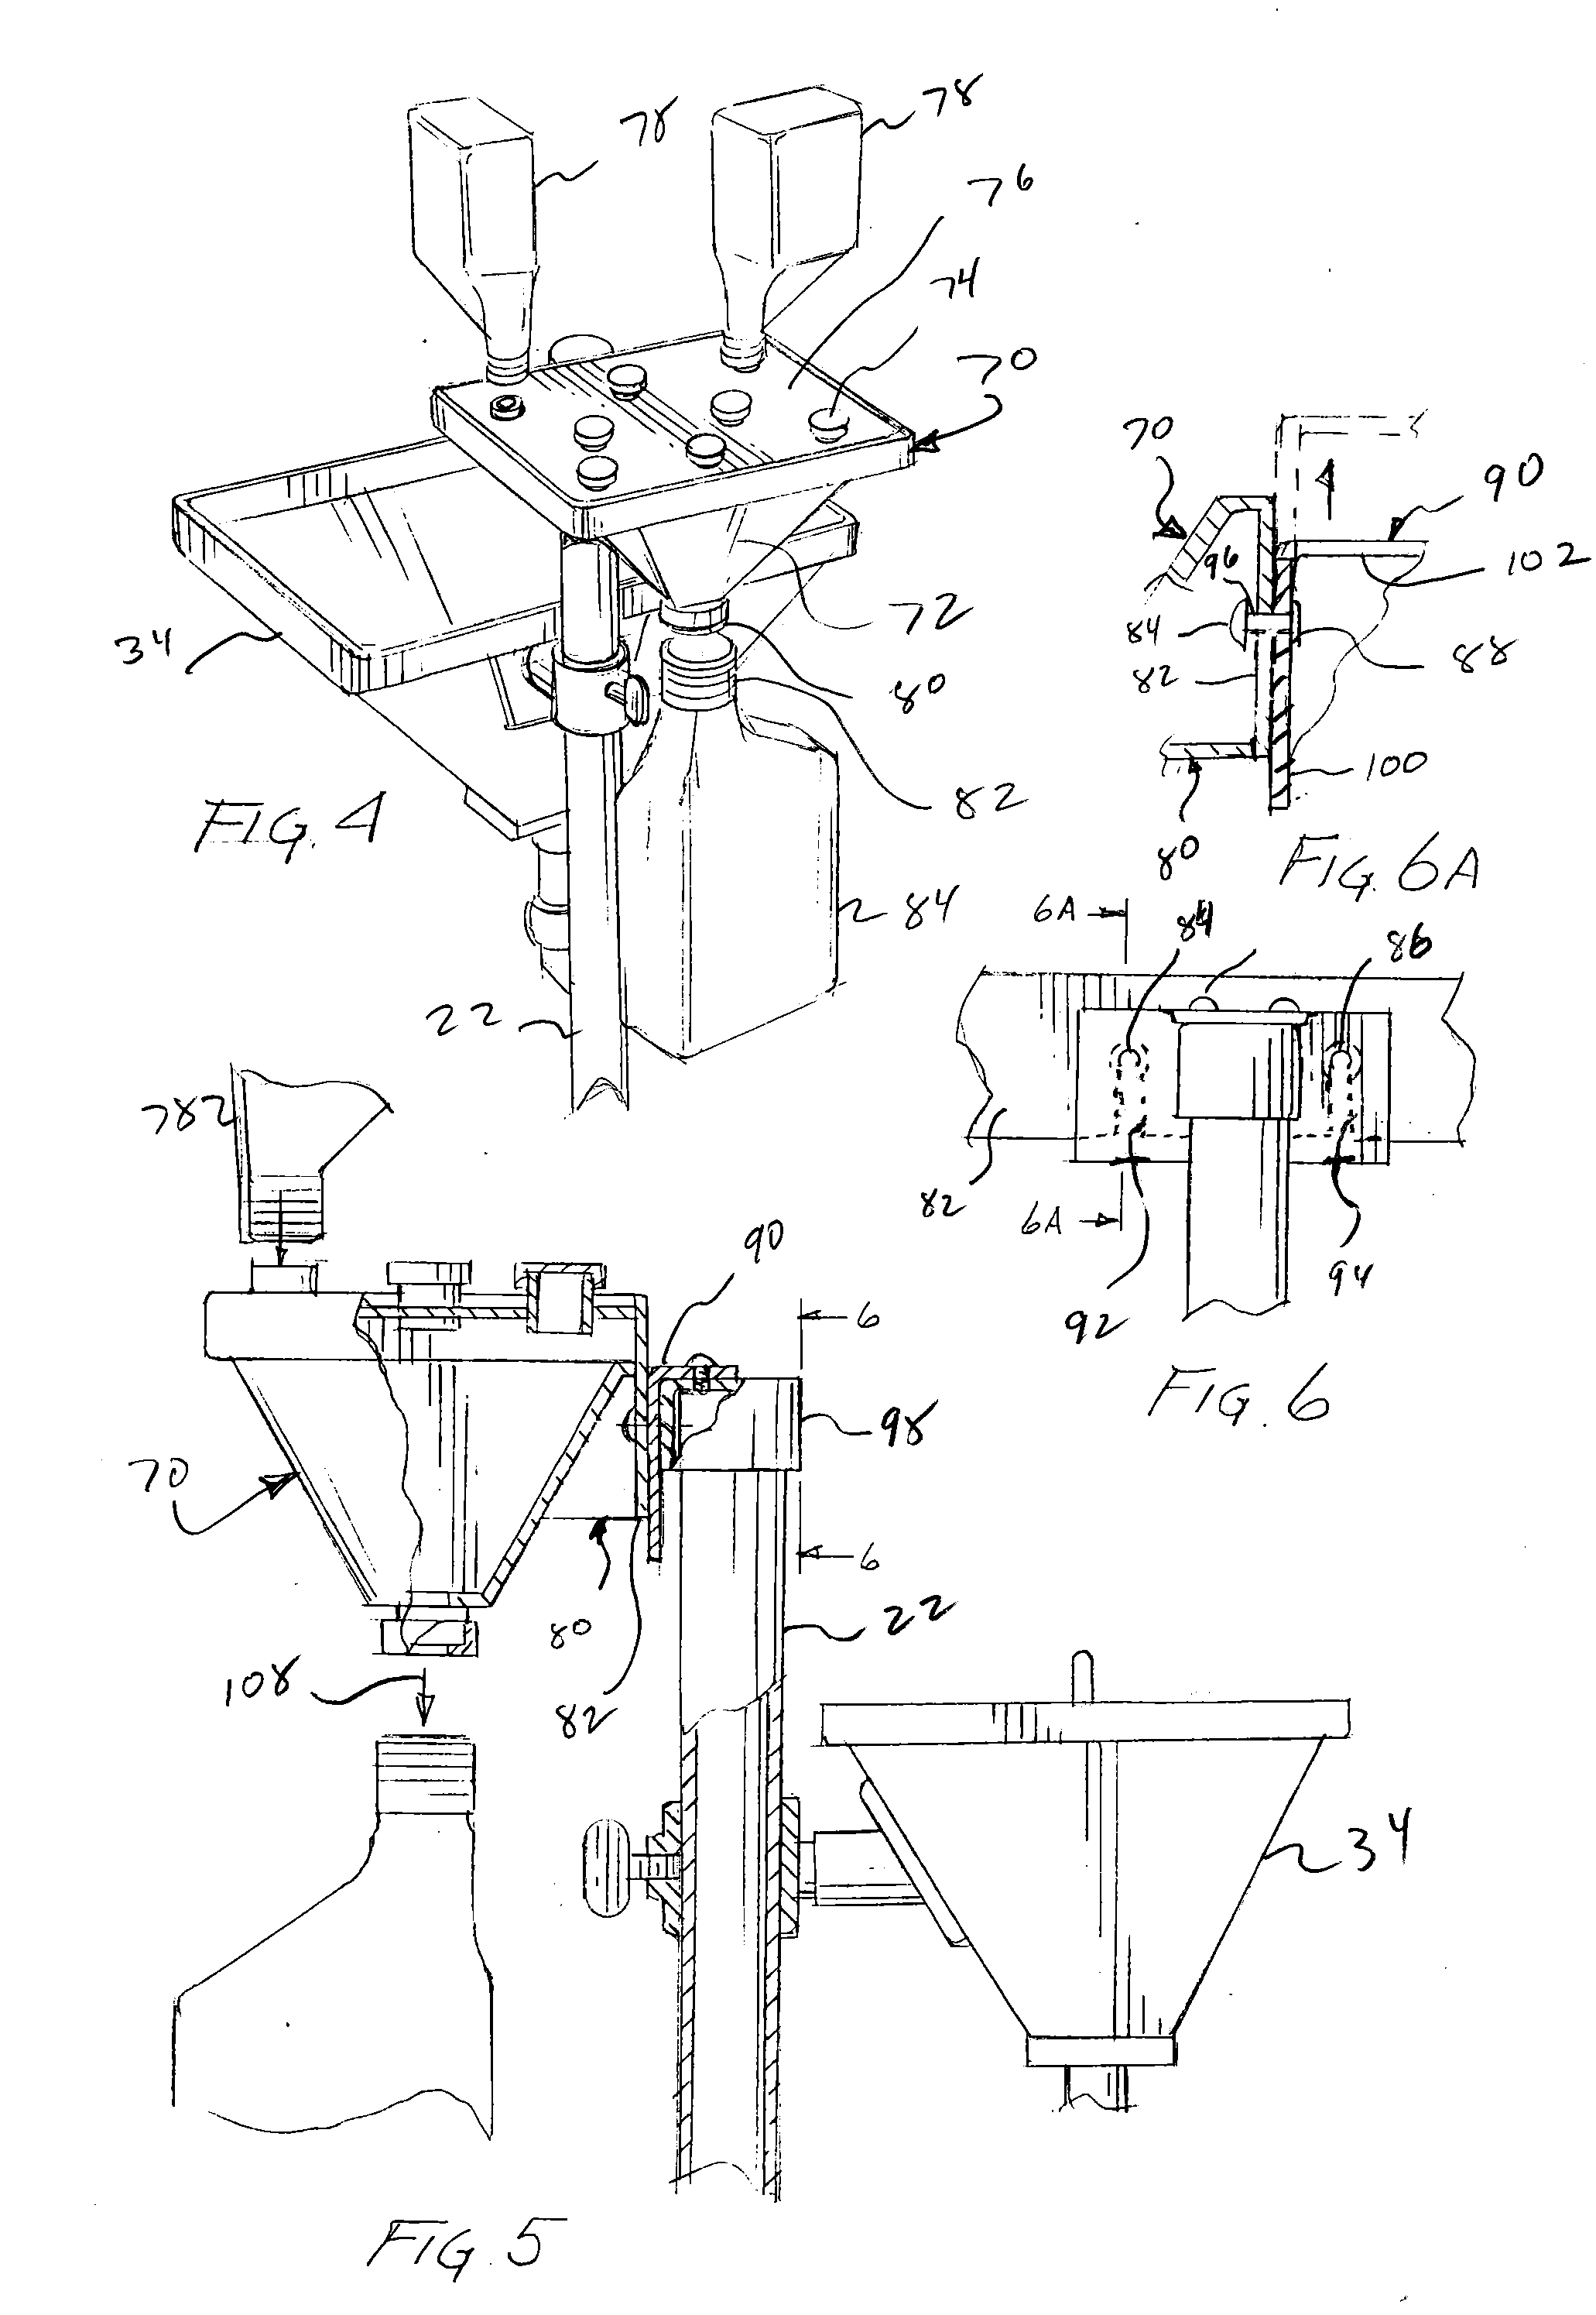 Dismantleable apparatus for transferring fluids between containers